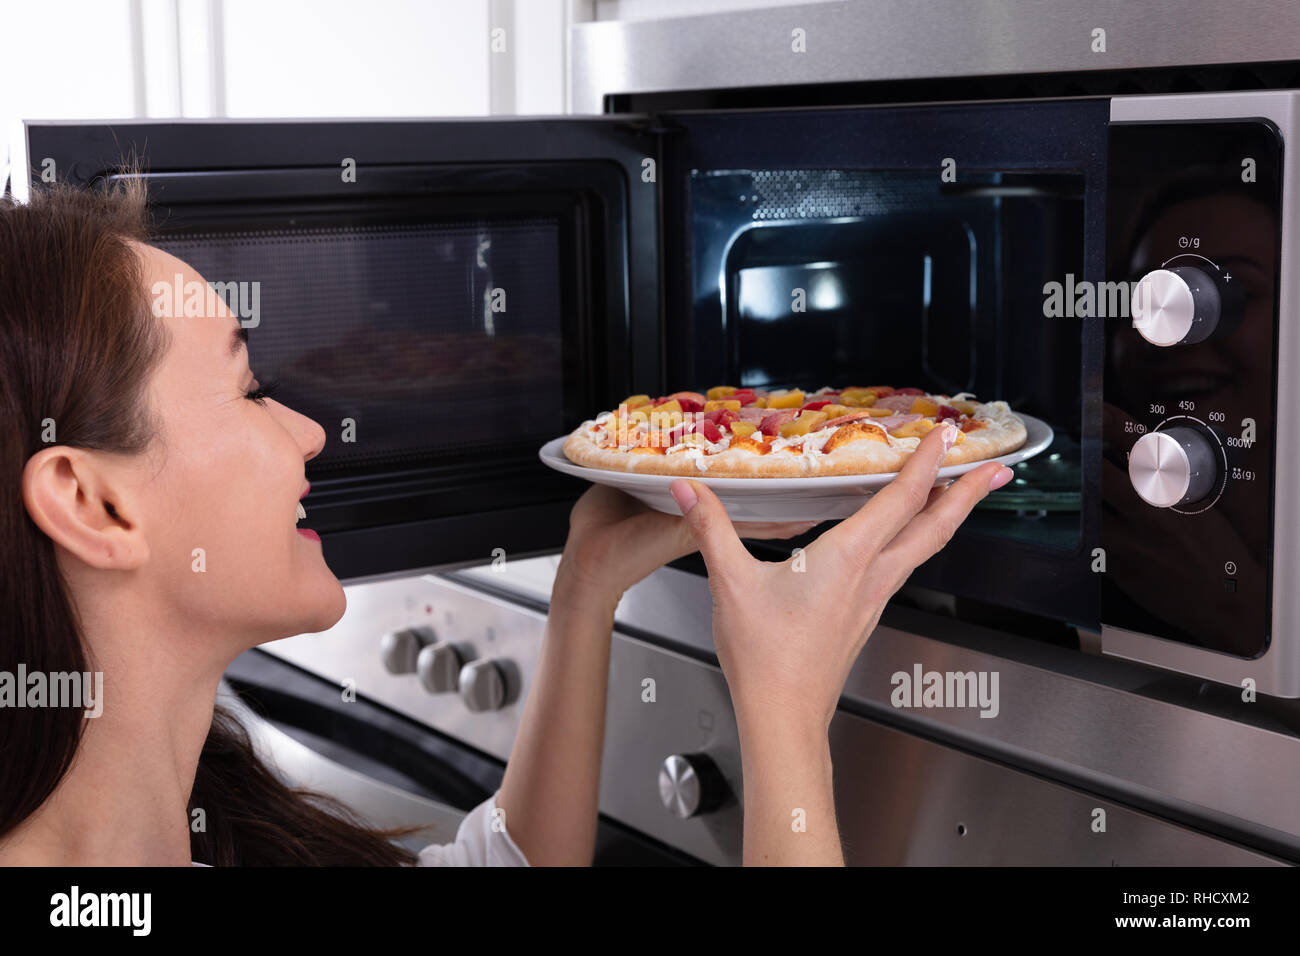 https://c8.alamy.com/comp/RHCXM2/close-up-of-a-happy-woman-baking-pizza-in-microwave-oven-RHCXM2.jpg